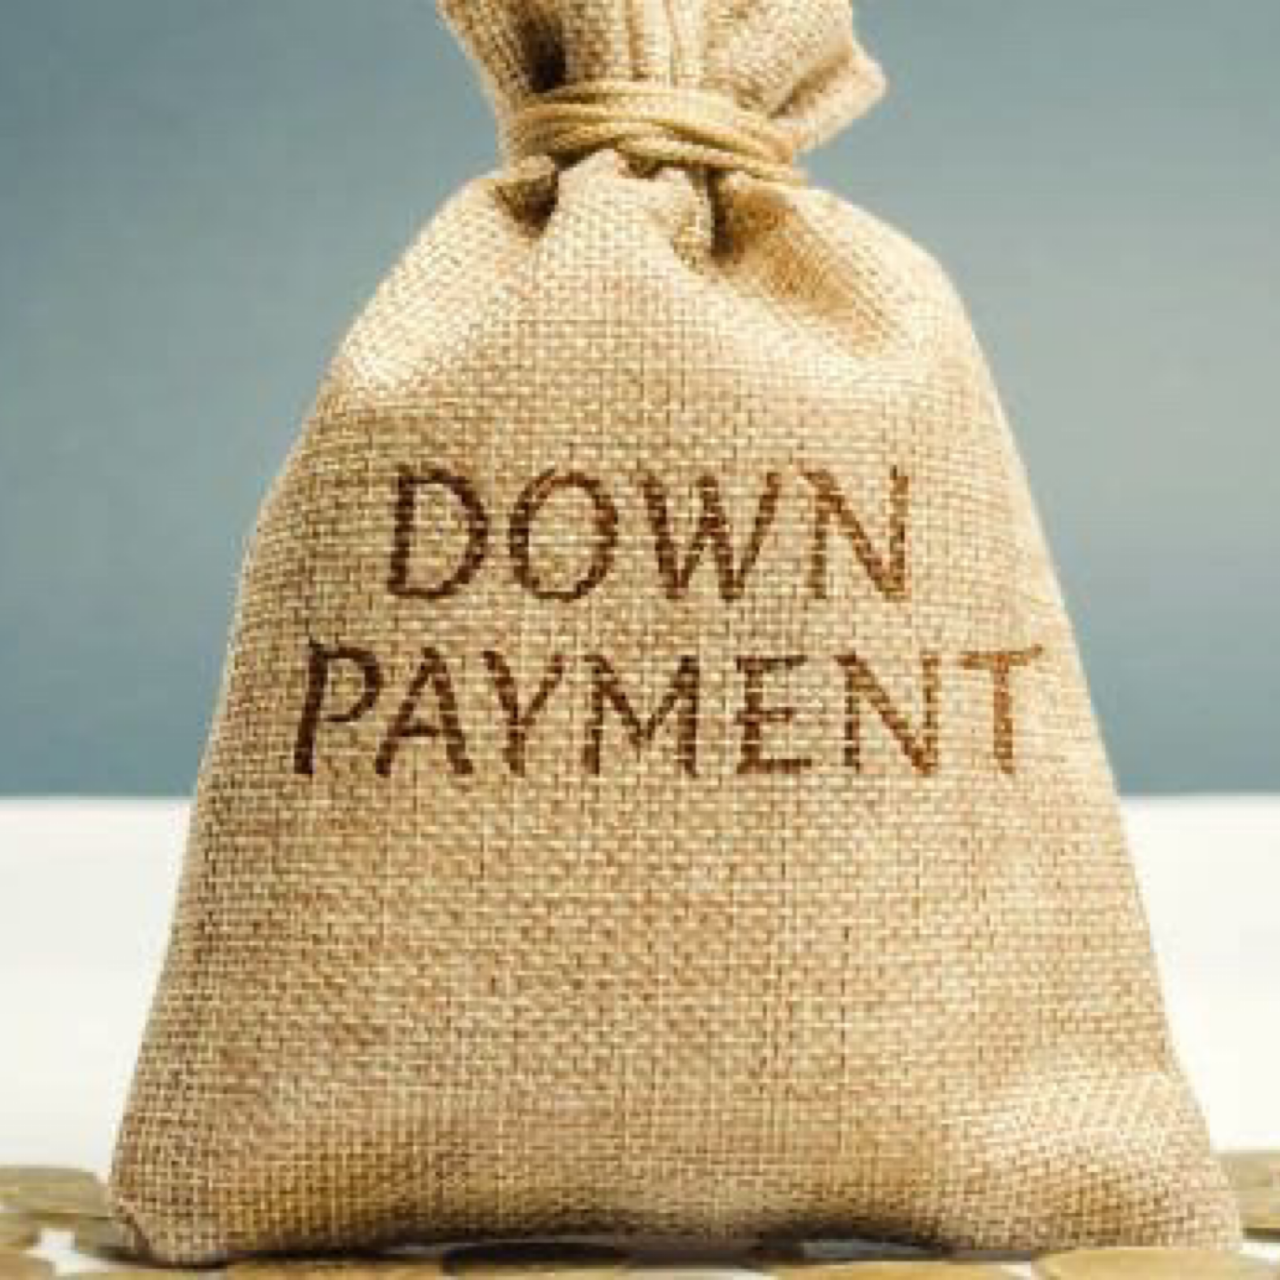 Vancouver down payments: How much do I need to save to buy a home?